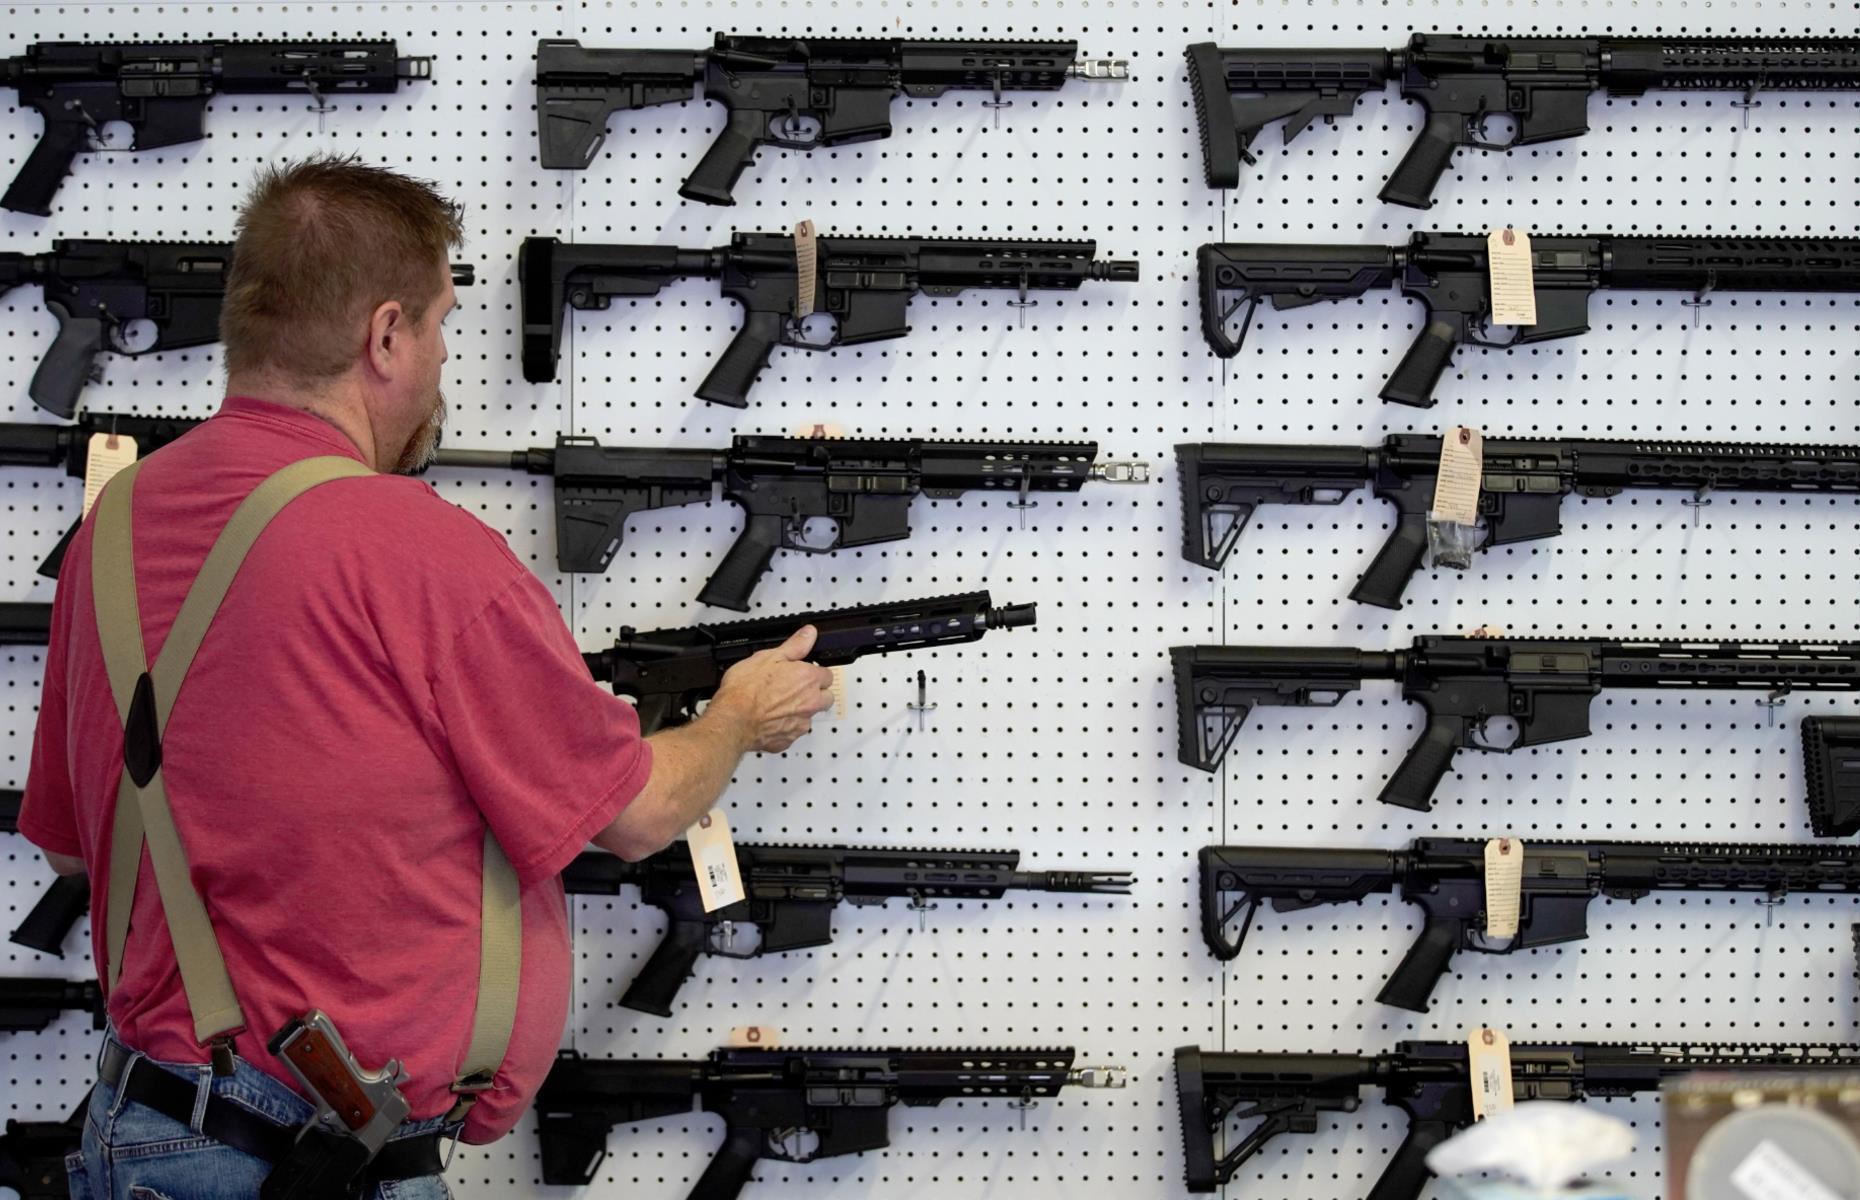 Fact: Americans bought more guns than ever before